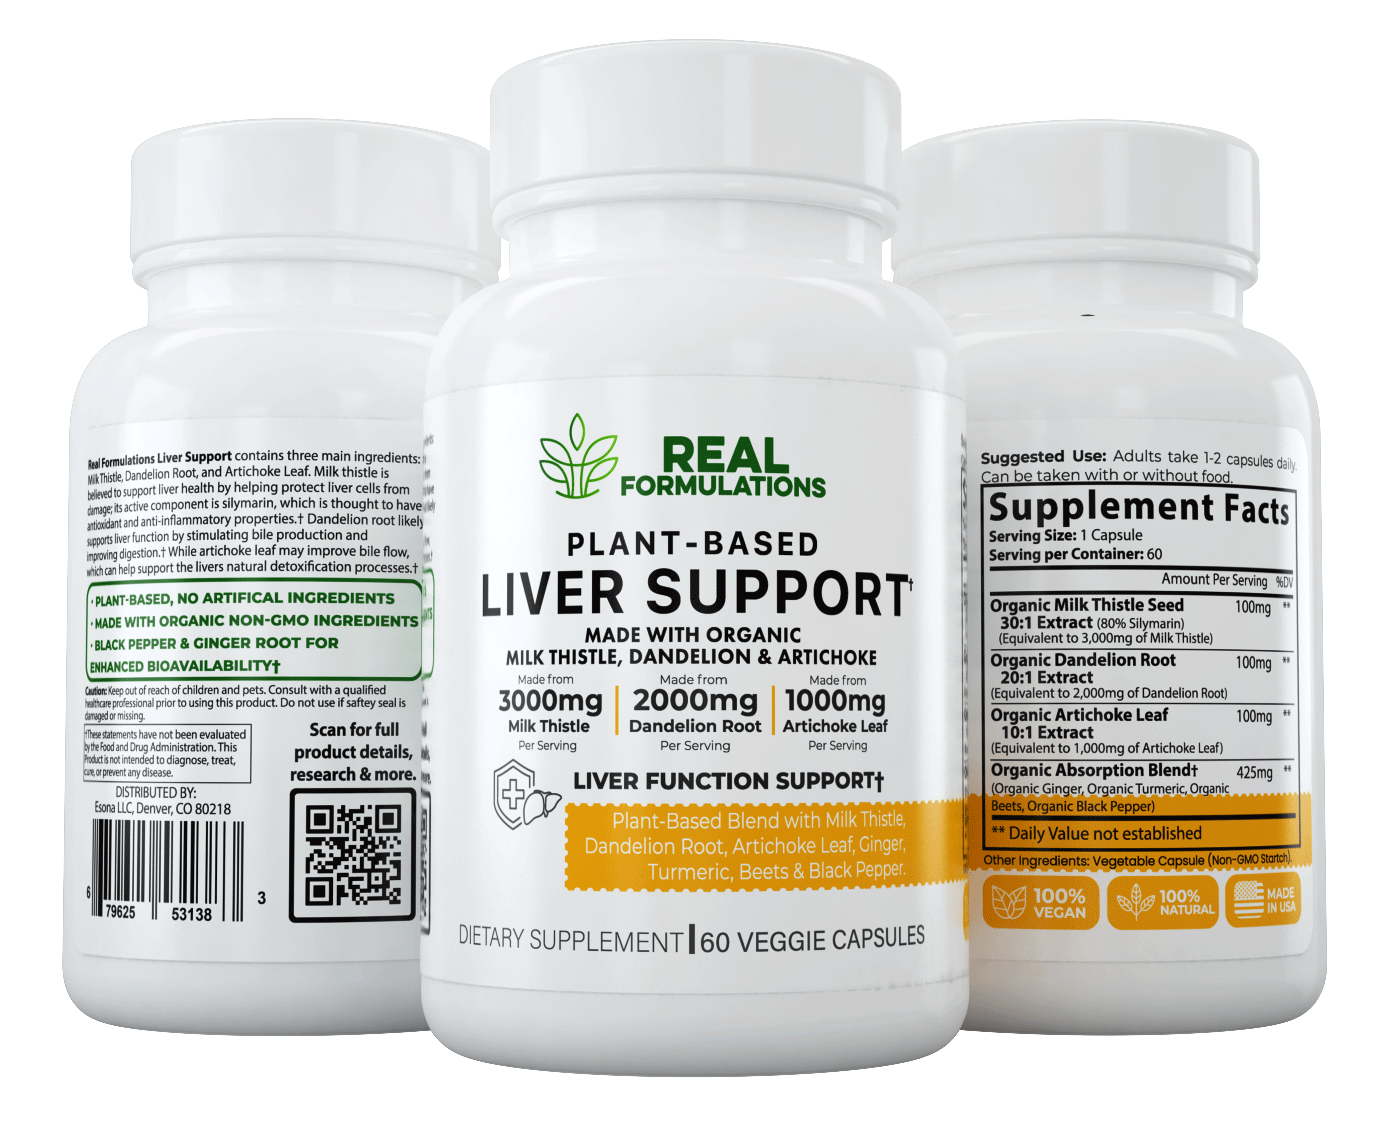 Real Formulations Plant-Based Liver Support.* A blend of Milk Thistle Seed Extract, Dandelion Root Extract, Artichoke Leaf Extract, Ginger Root, Turmeric, Beets & Black pepper.